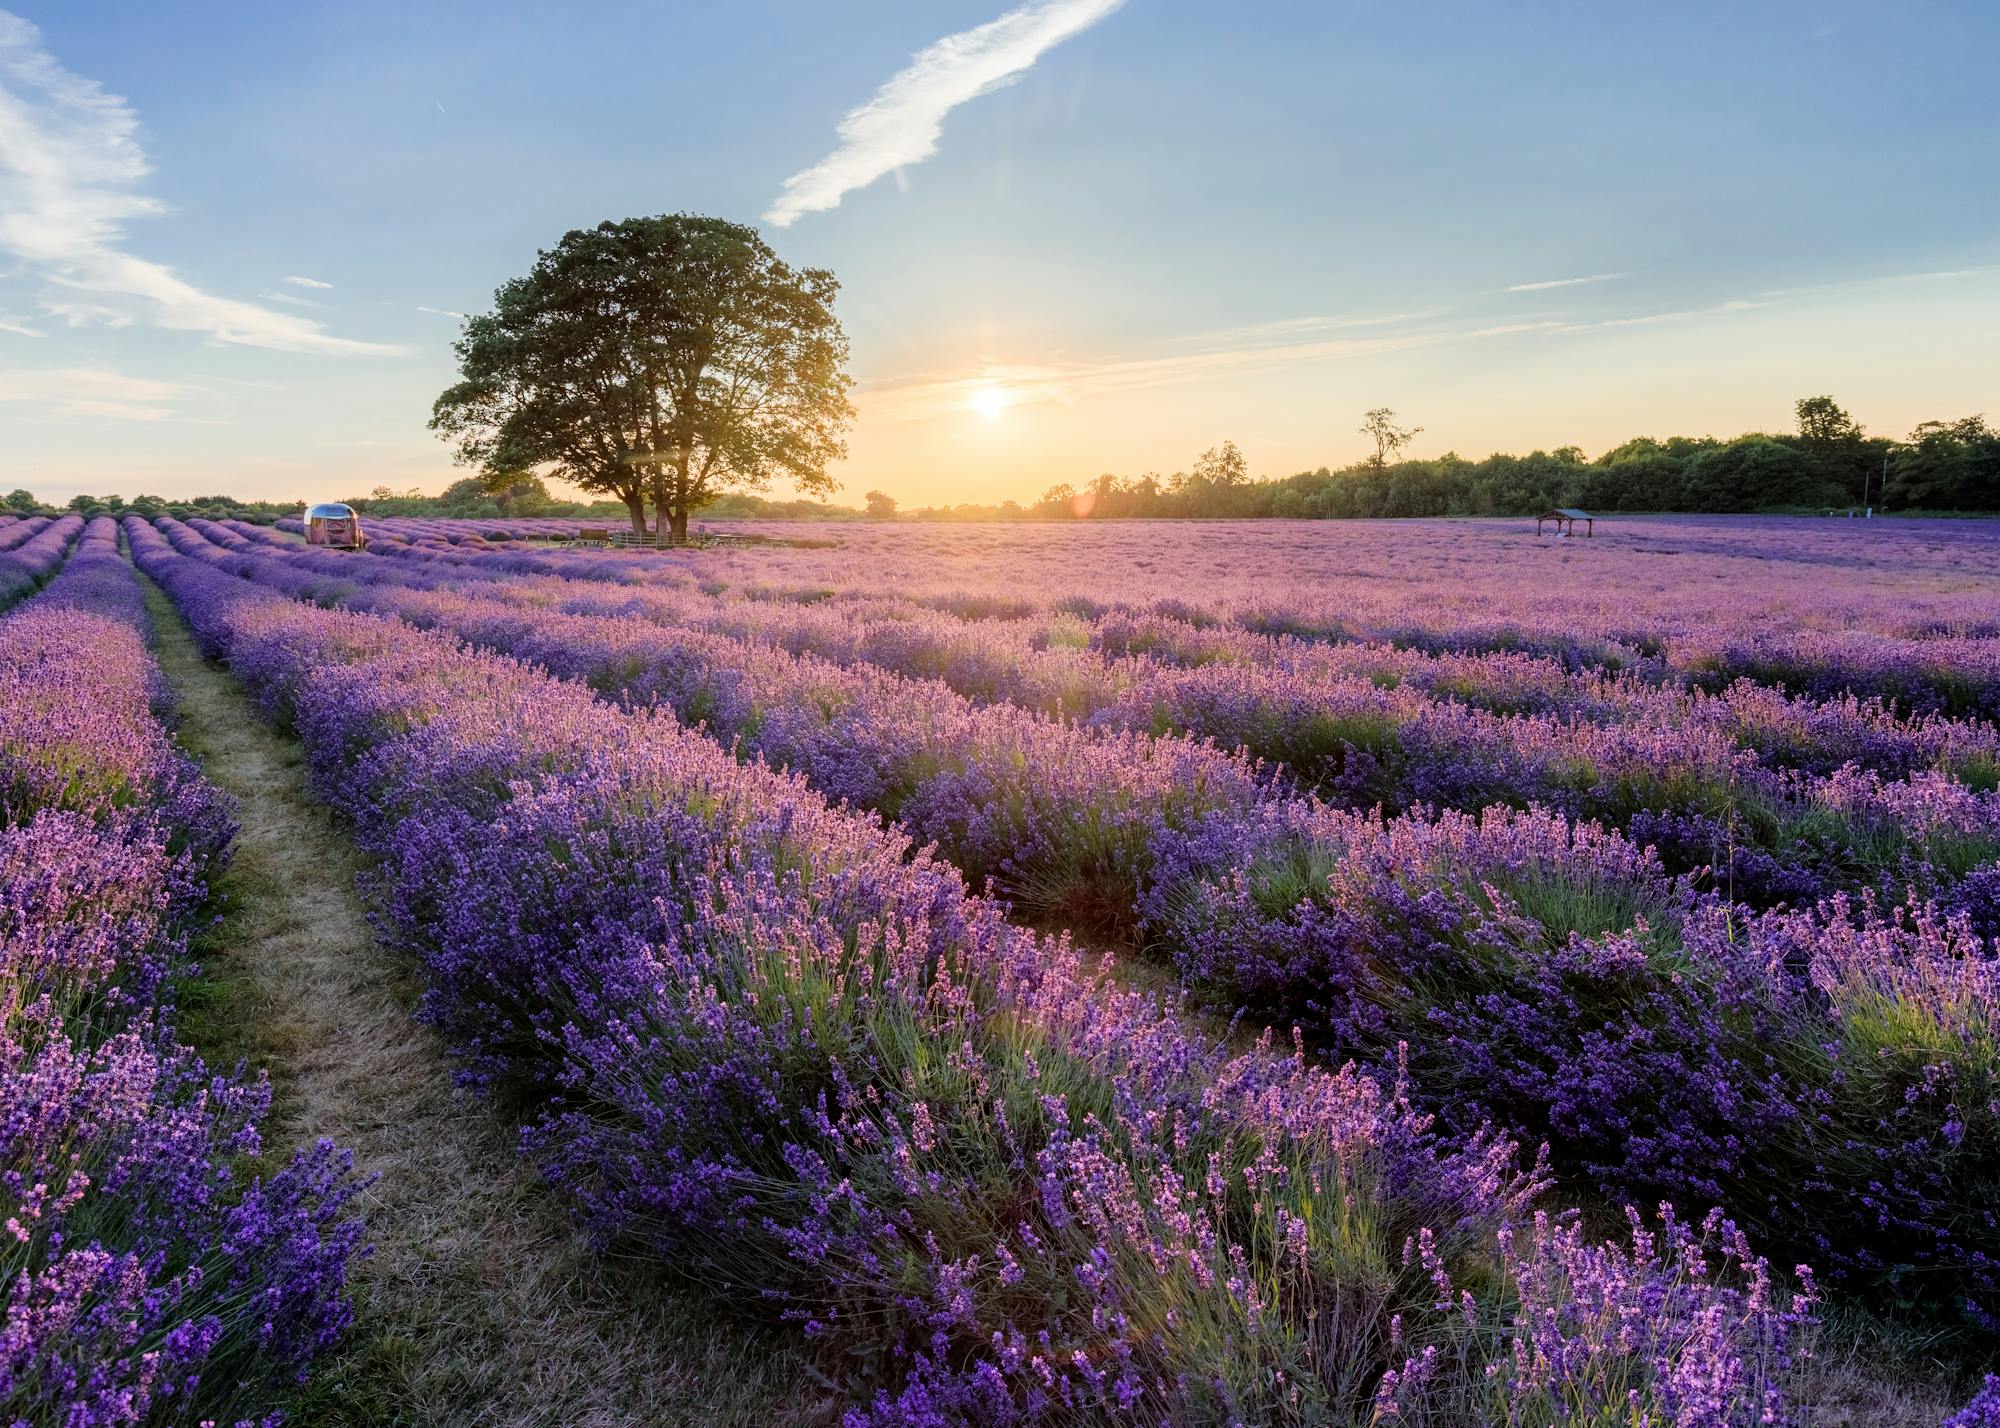 An evening at Mayfield Lavender Farm